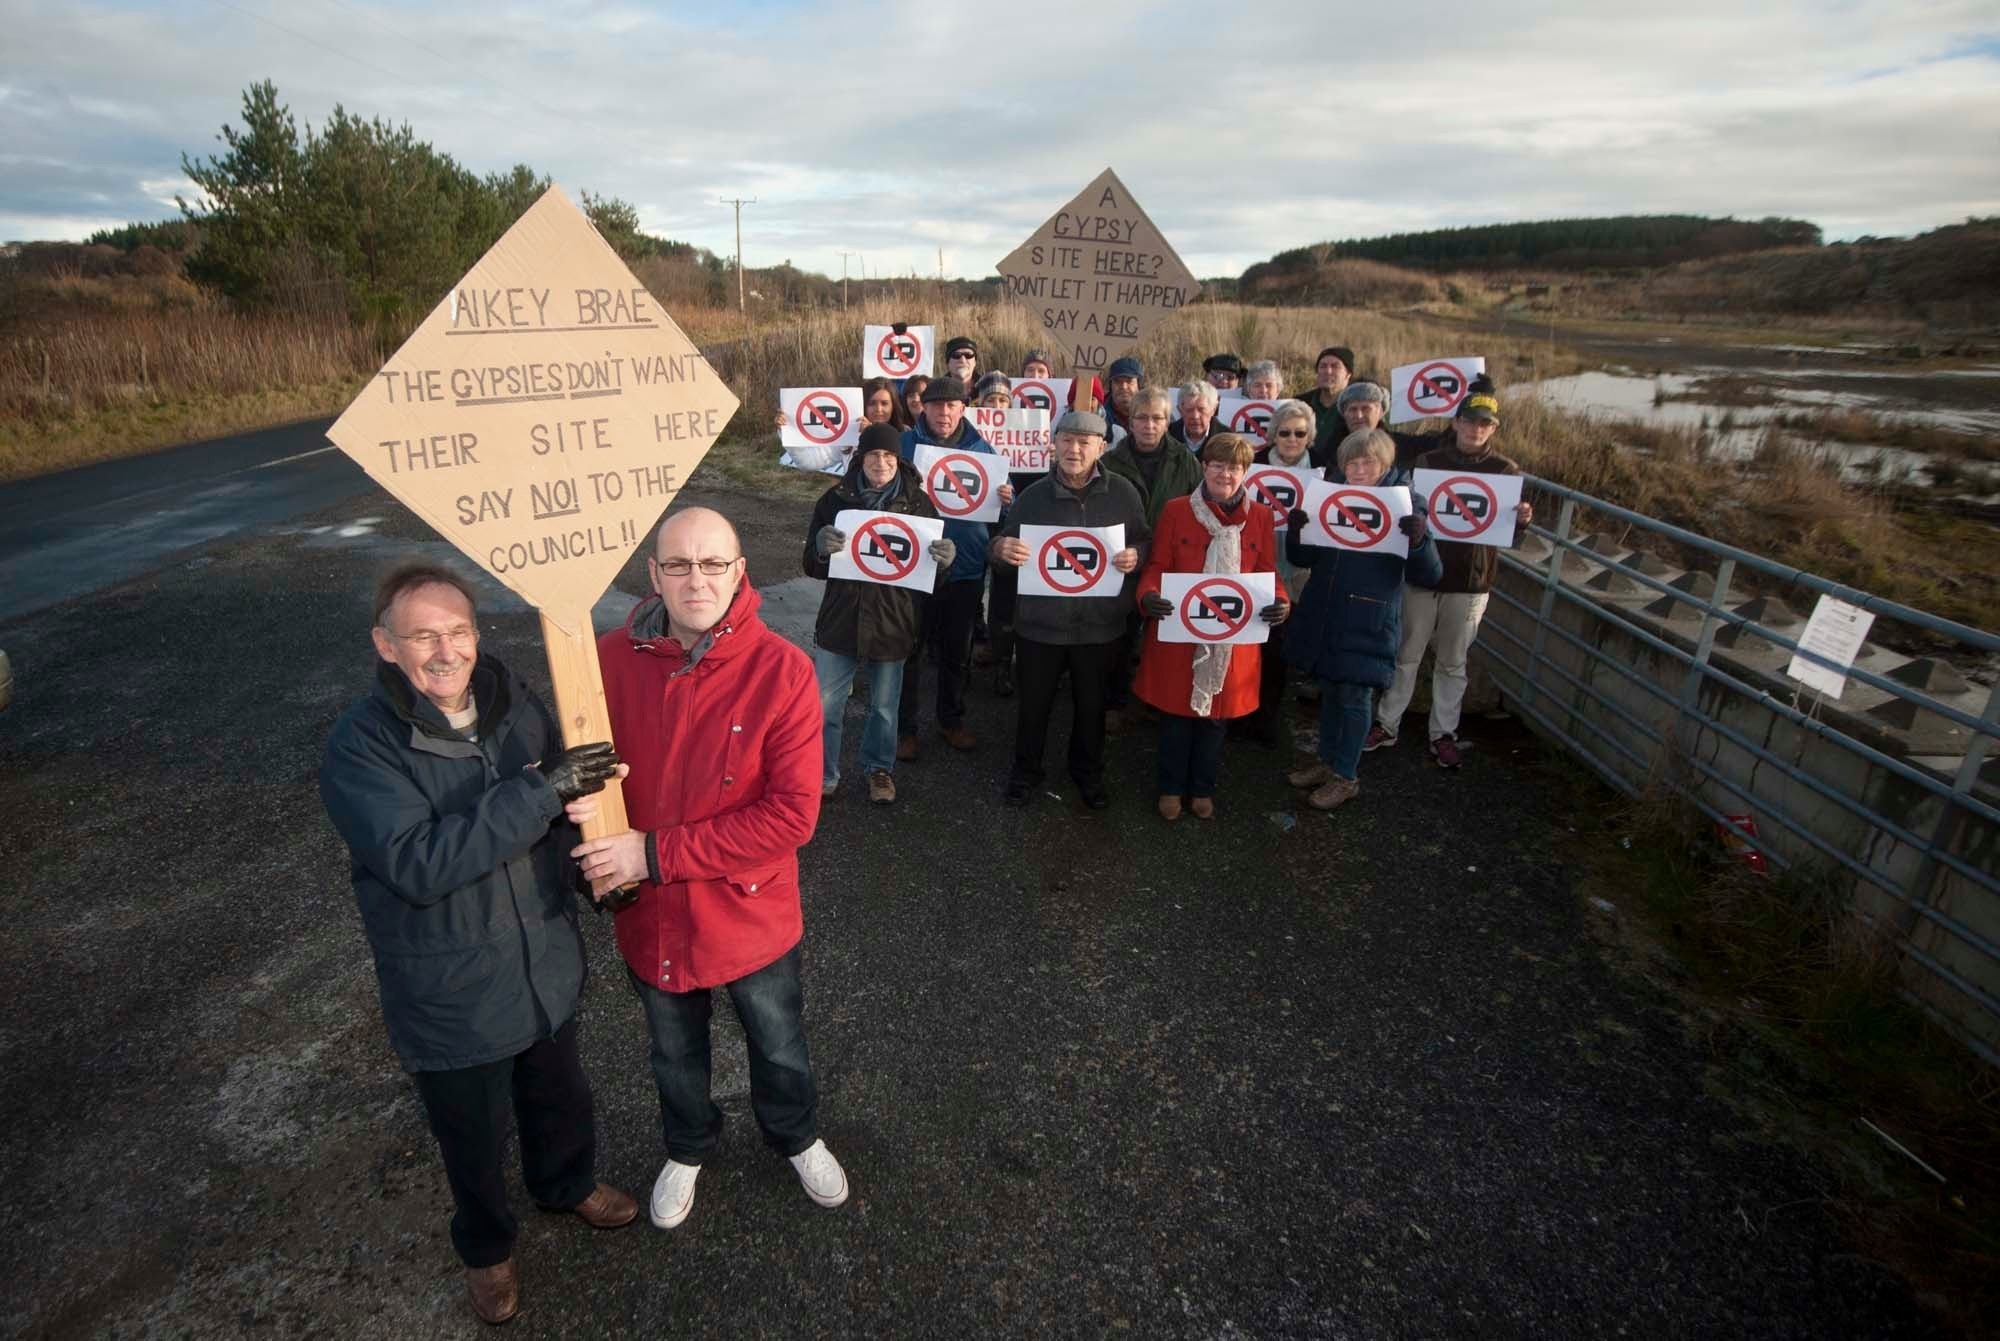 Old Deer residents protested  Aikey Brae as a site for travellers.